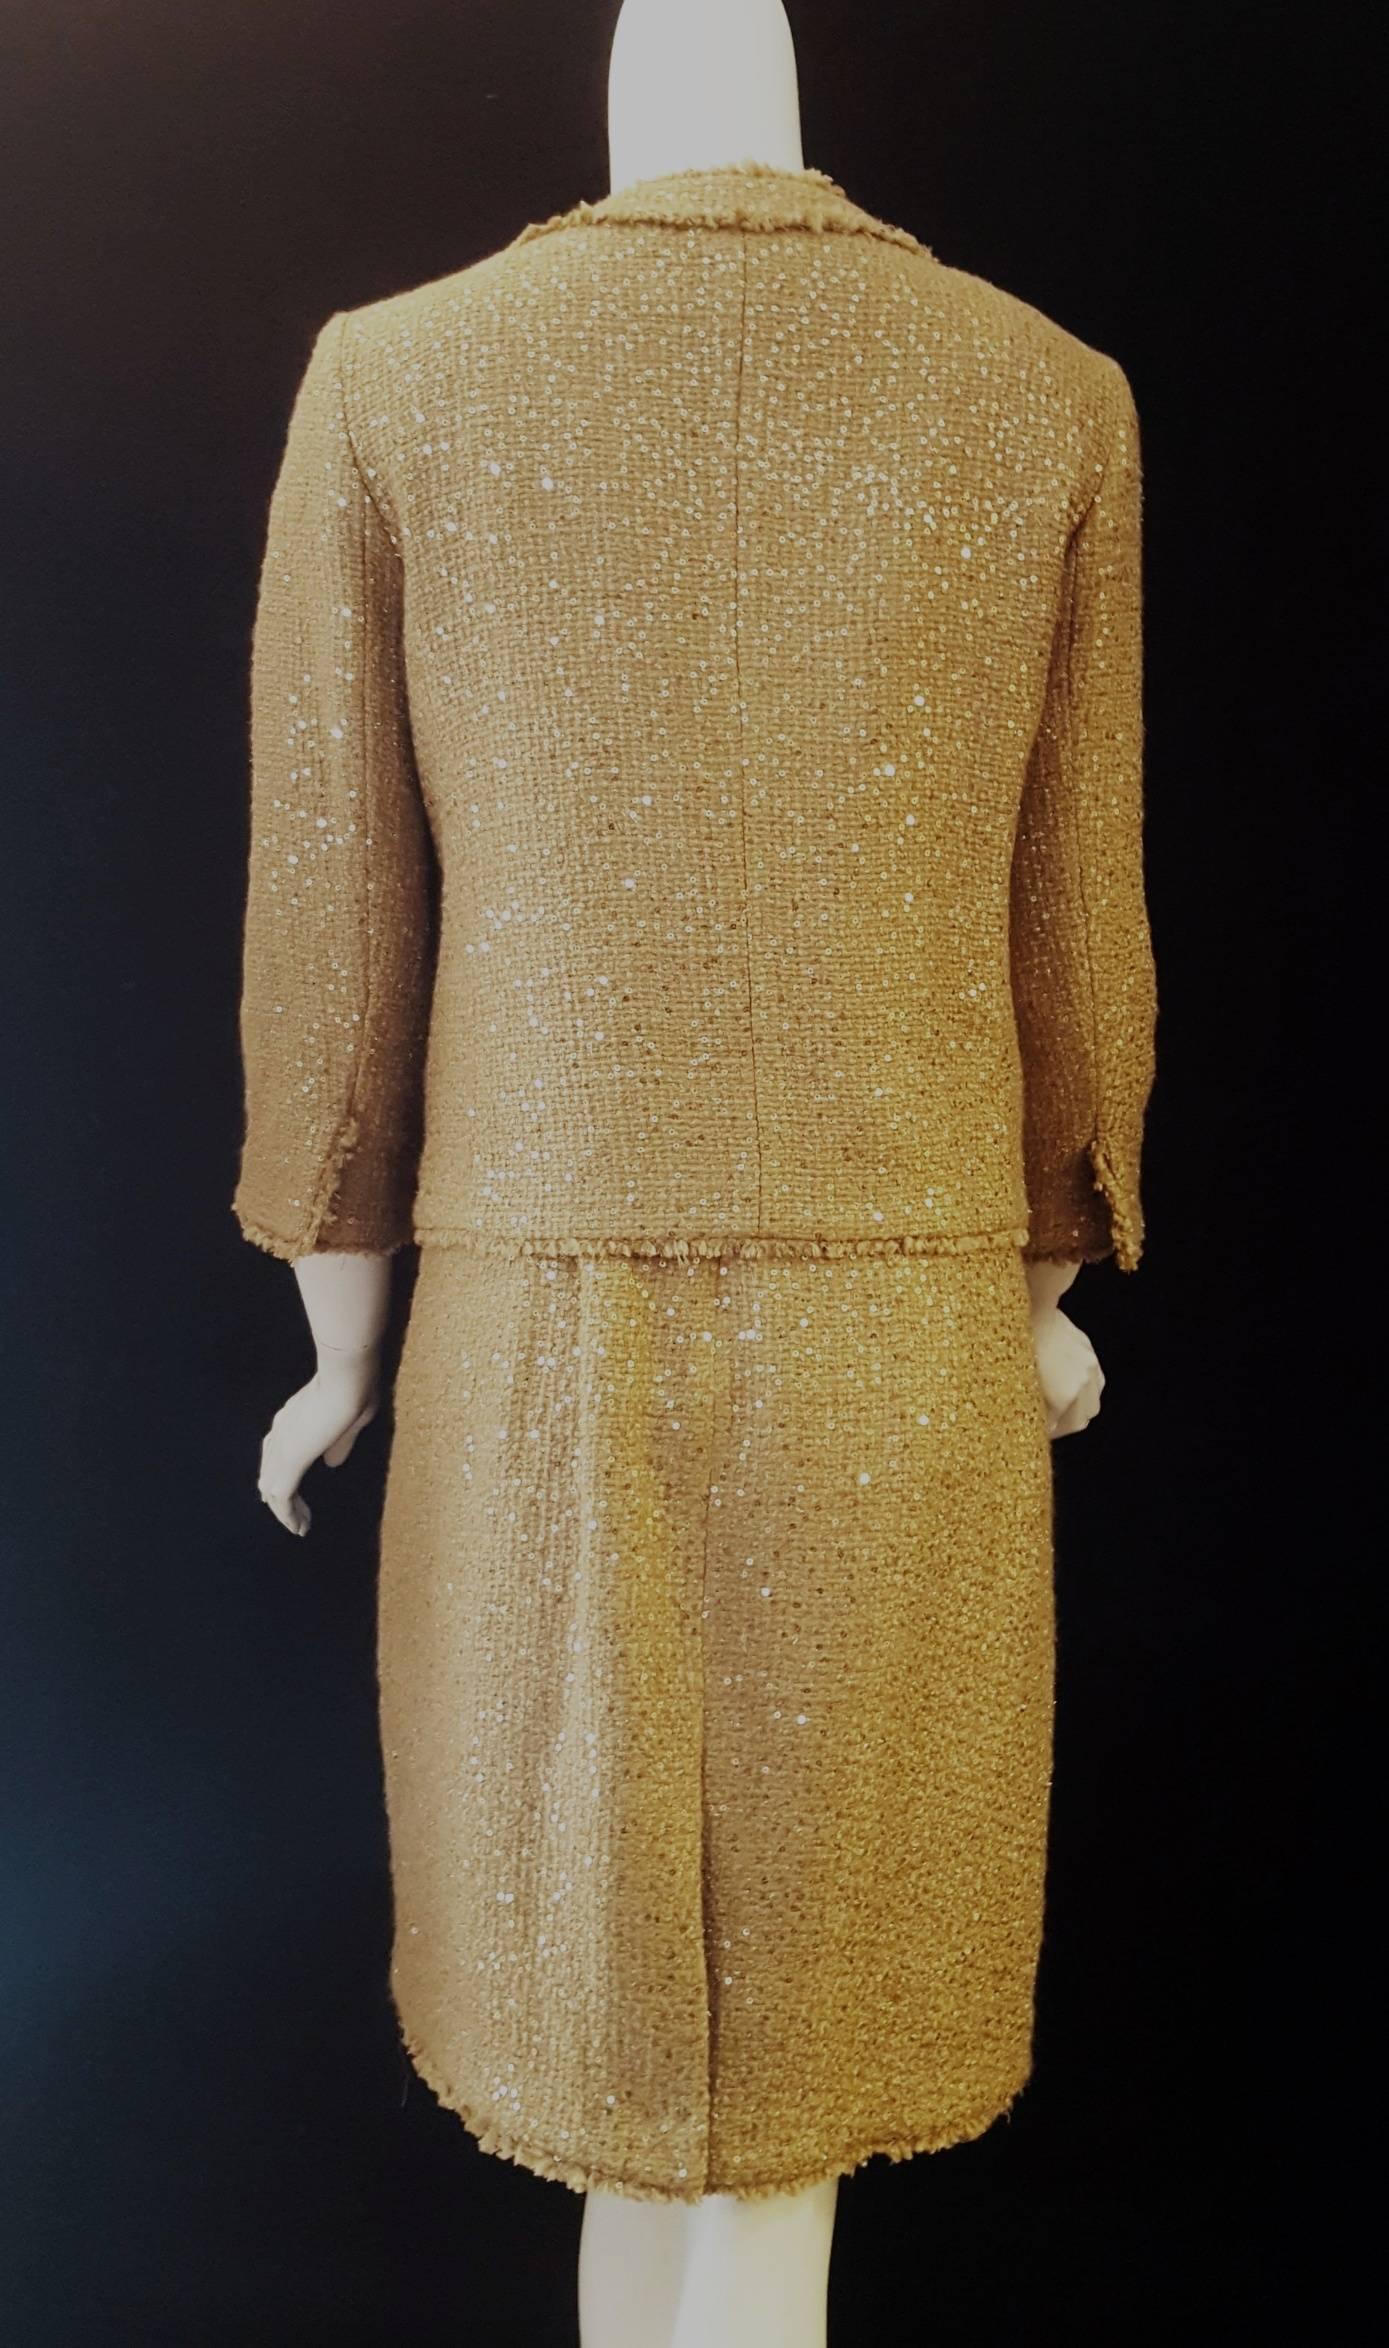 Magnificent Michael Kors Tweed  Two Piece Dress Suit Rose Gold Tone Sequin  In Excellent Condition For Sale In Palm Beach, FL